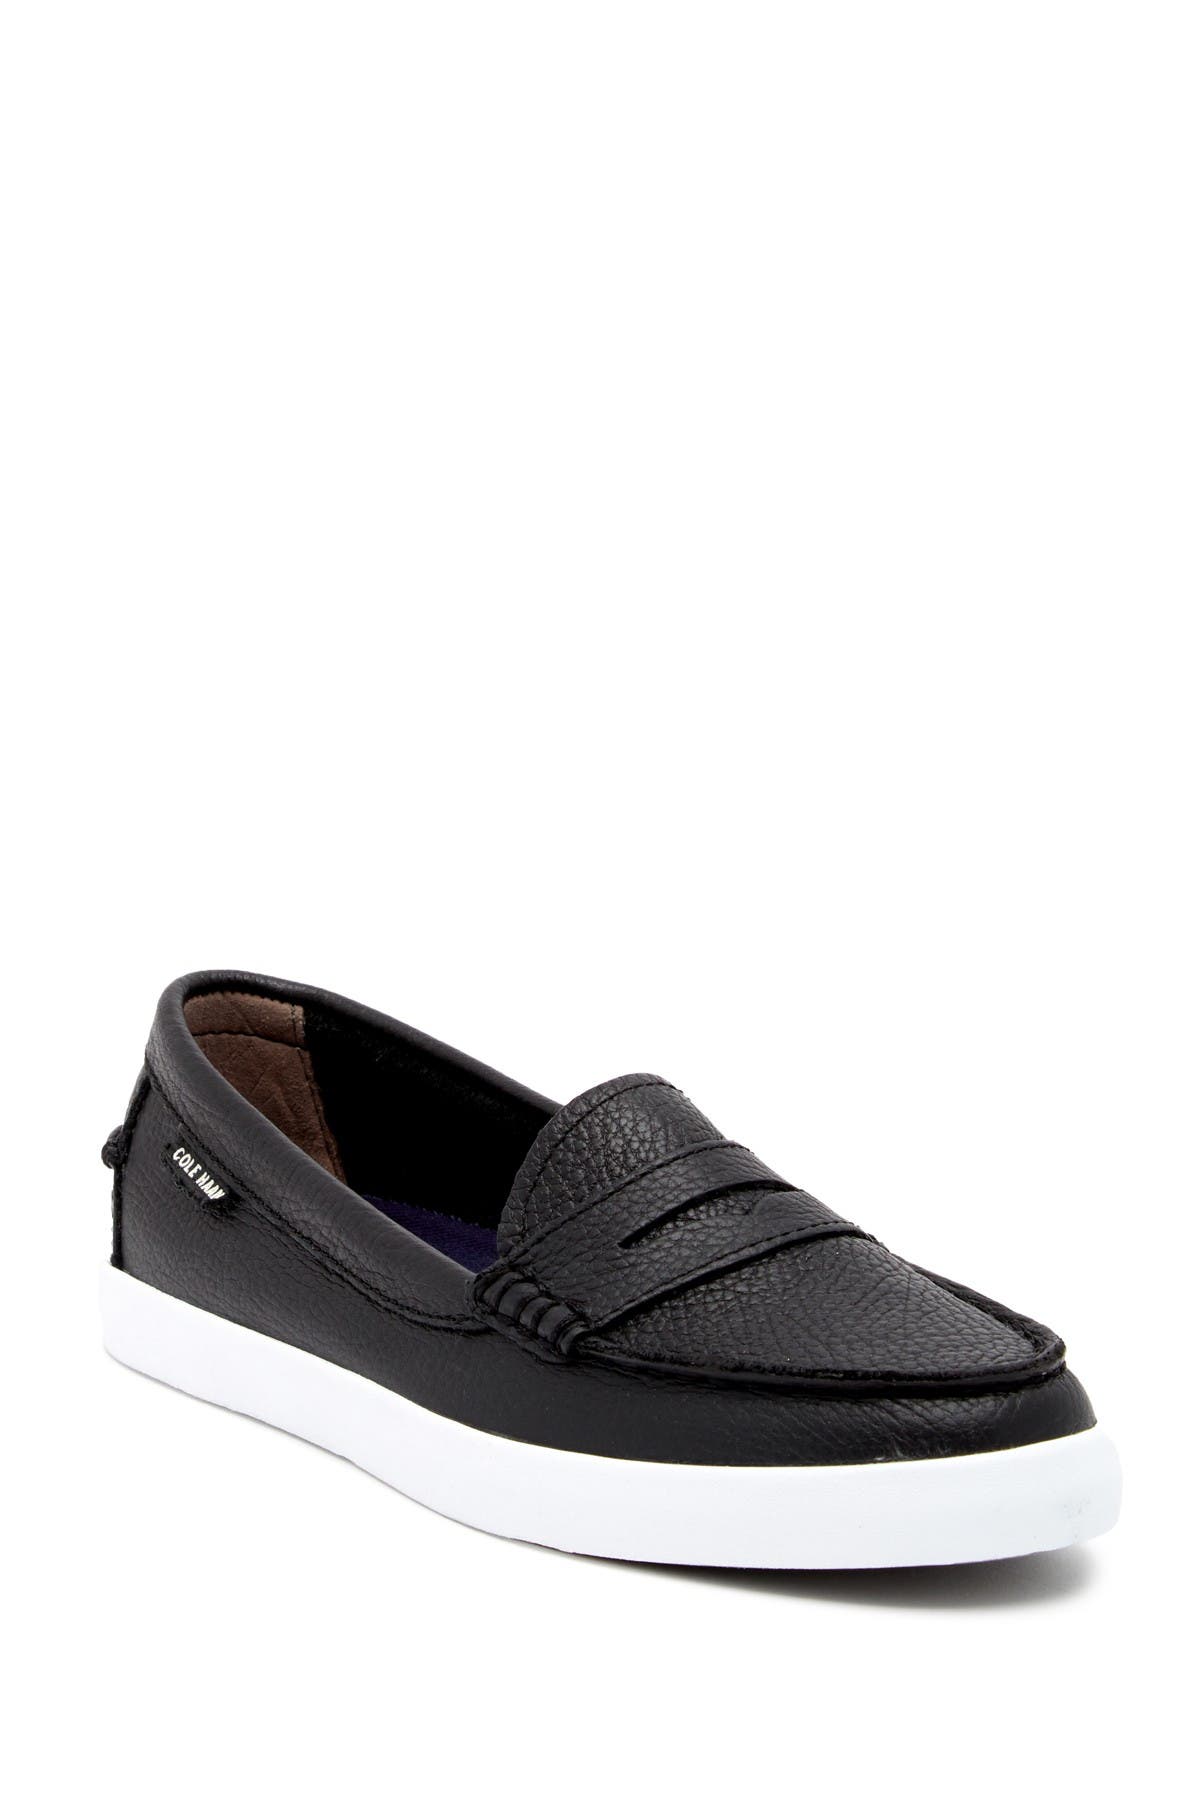 Cole Haan | Nantucket II Leather Loafer 